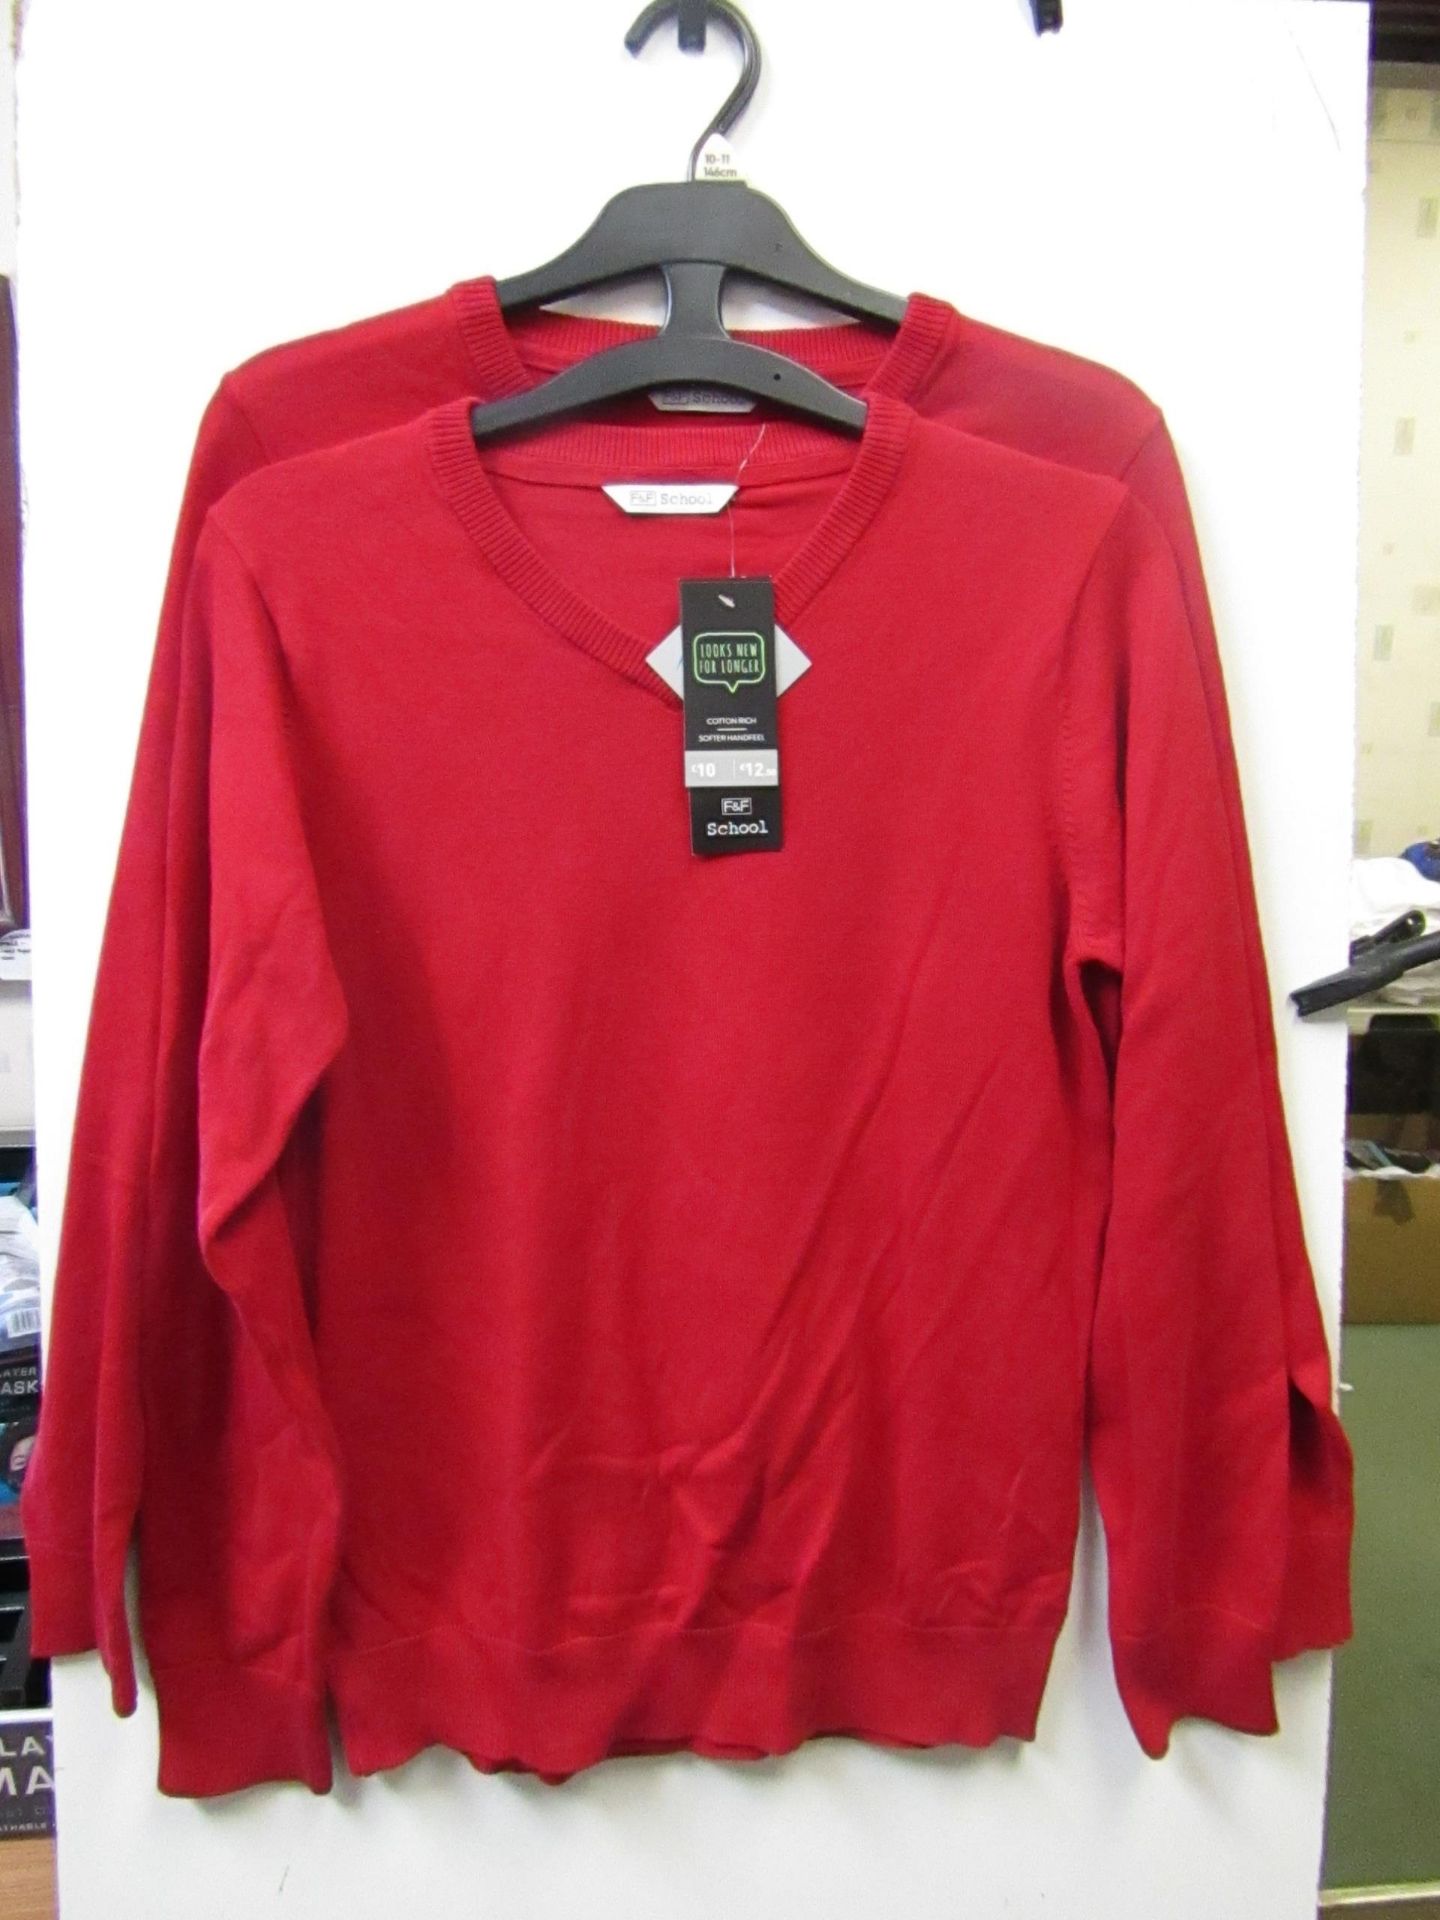 3x boys 2piece school jumper red - size 10/11 - new but might have security tags on.